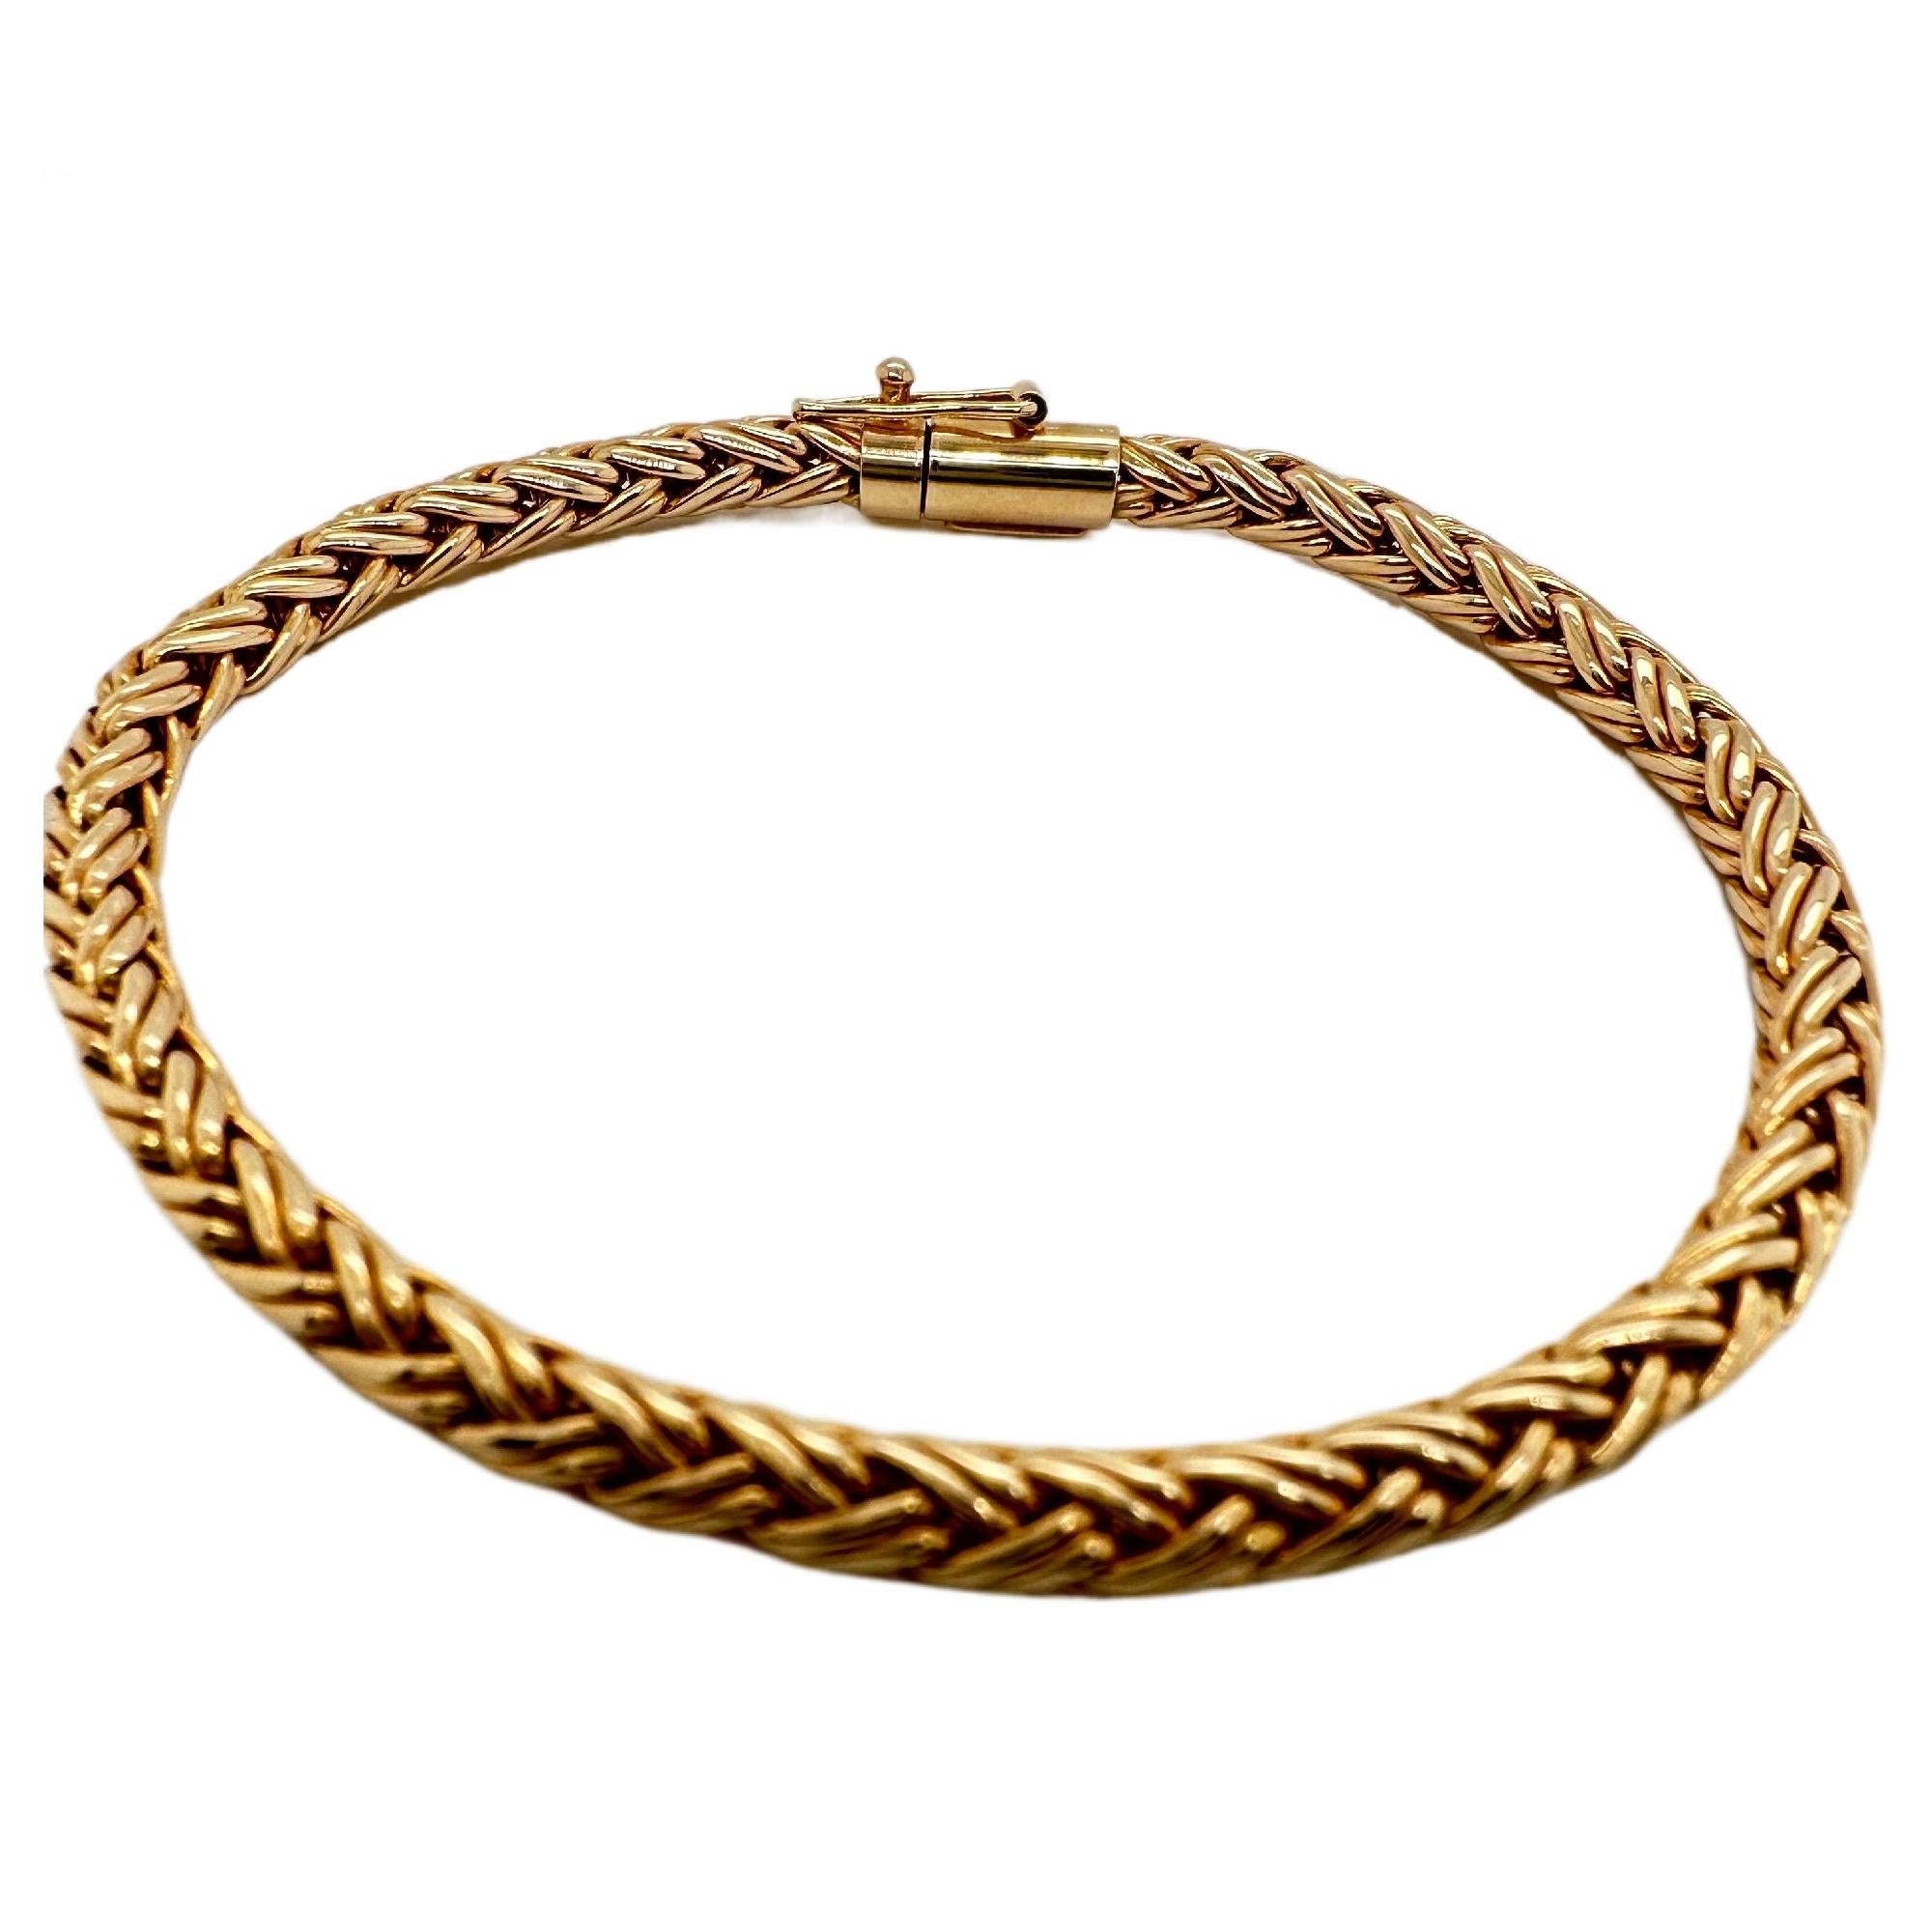 Tiffany & Co. Wheat Braided Rope Bracelet in 14k Yellow Gold For Sale 1